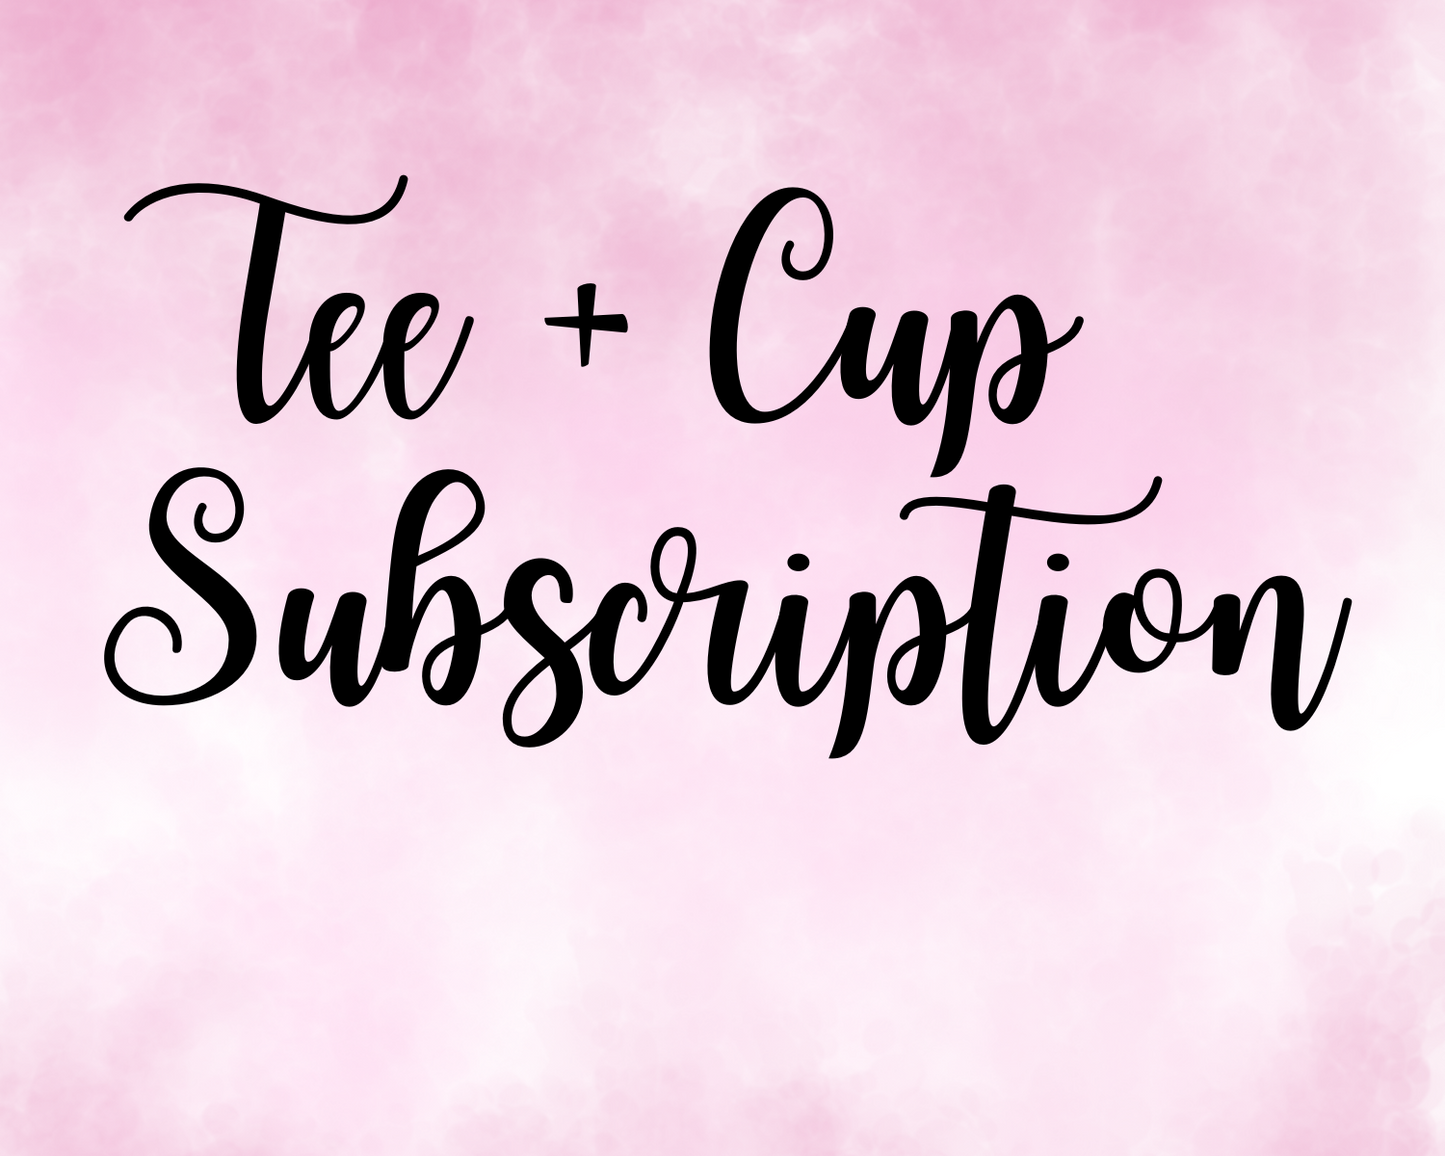 Tee + Cup Subscription